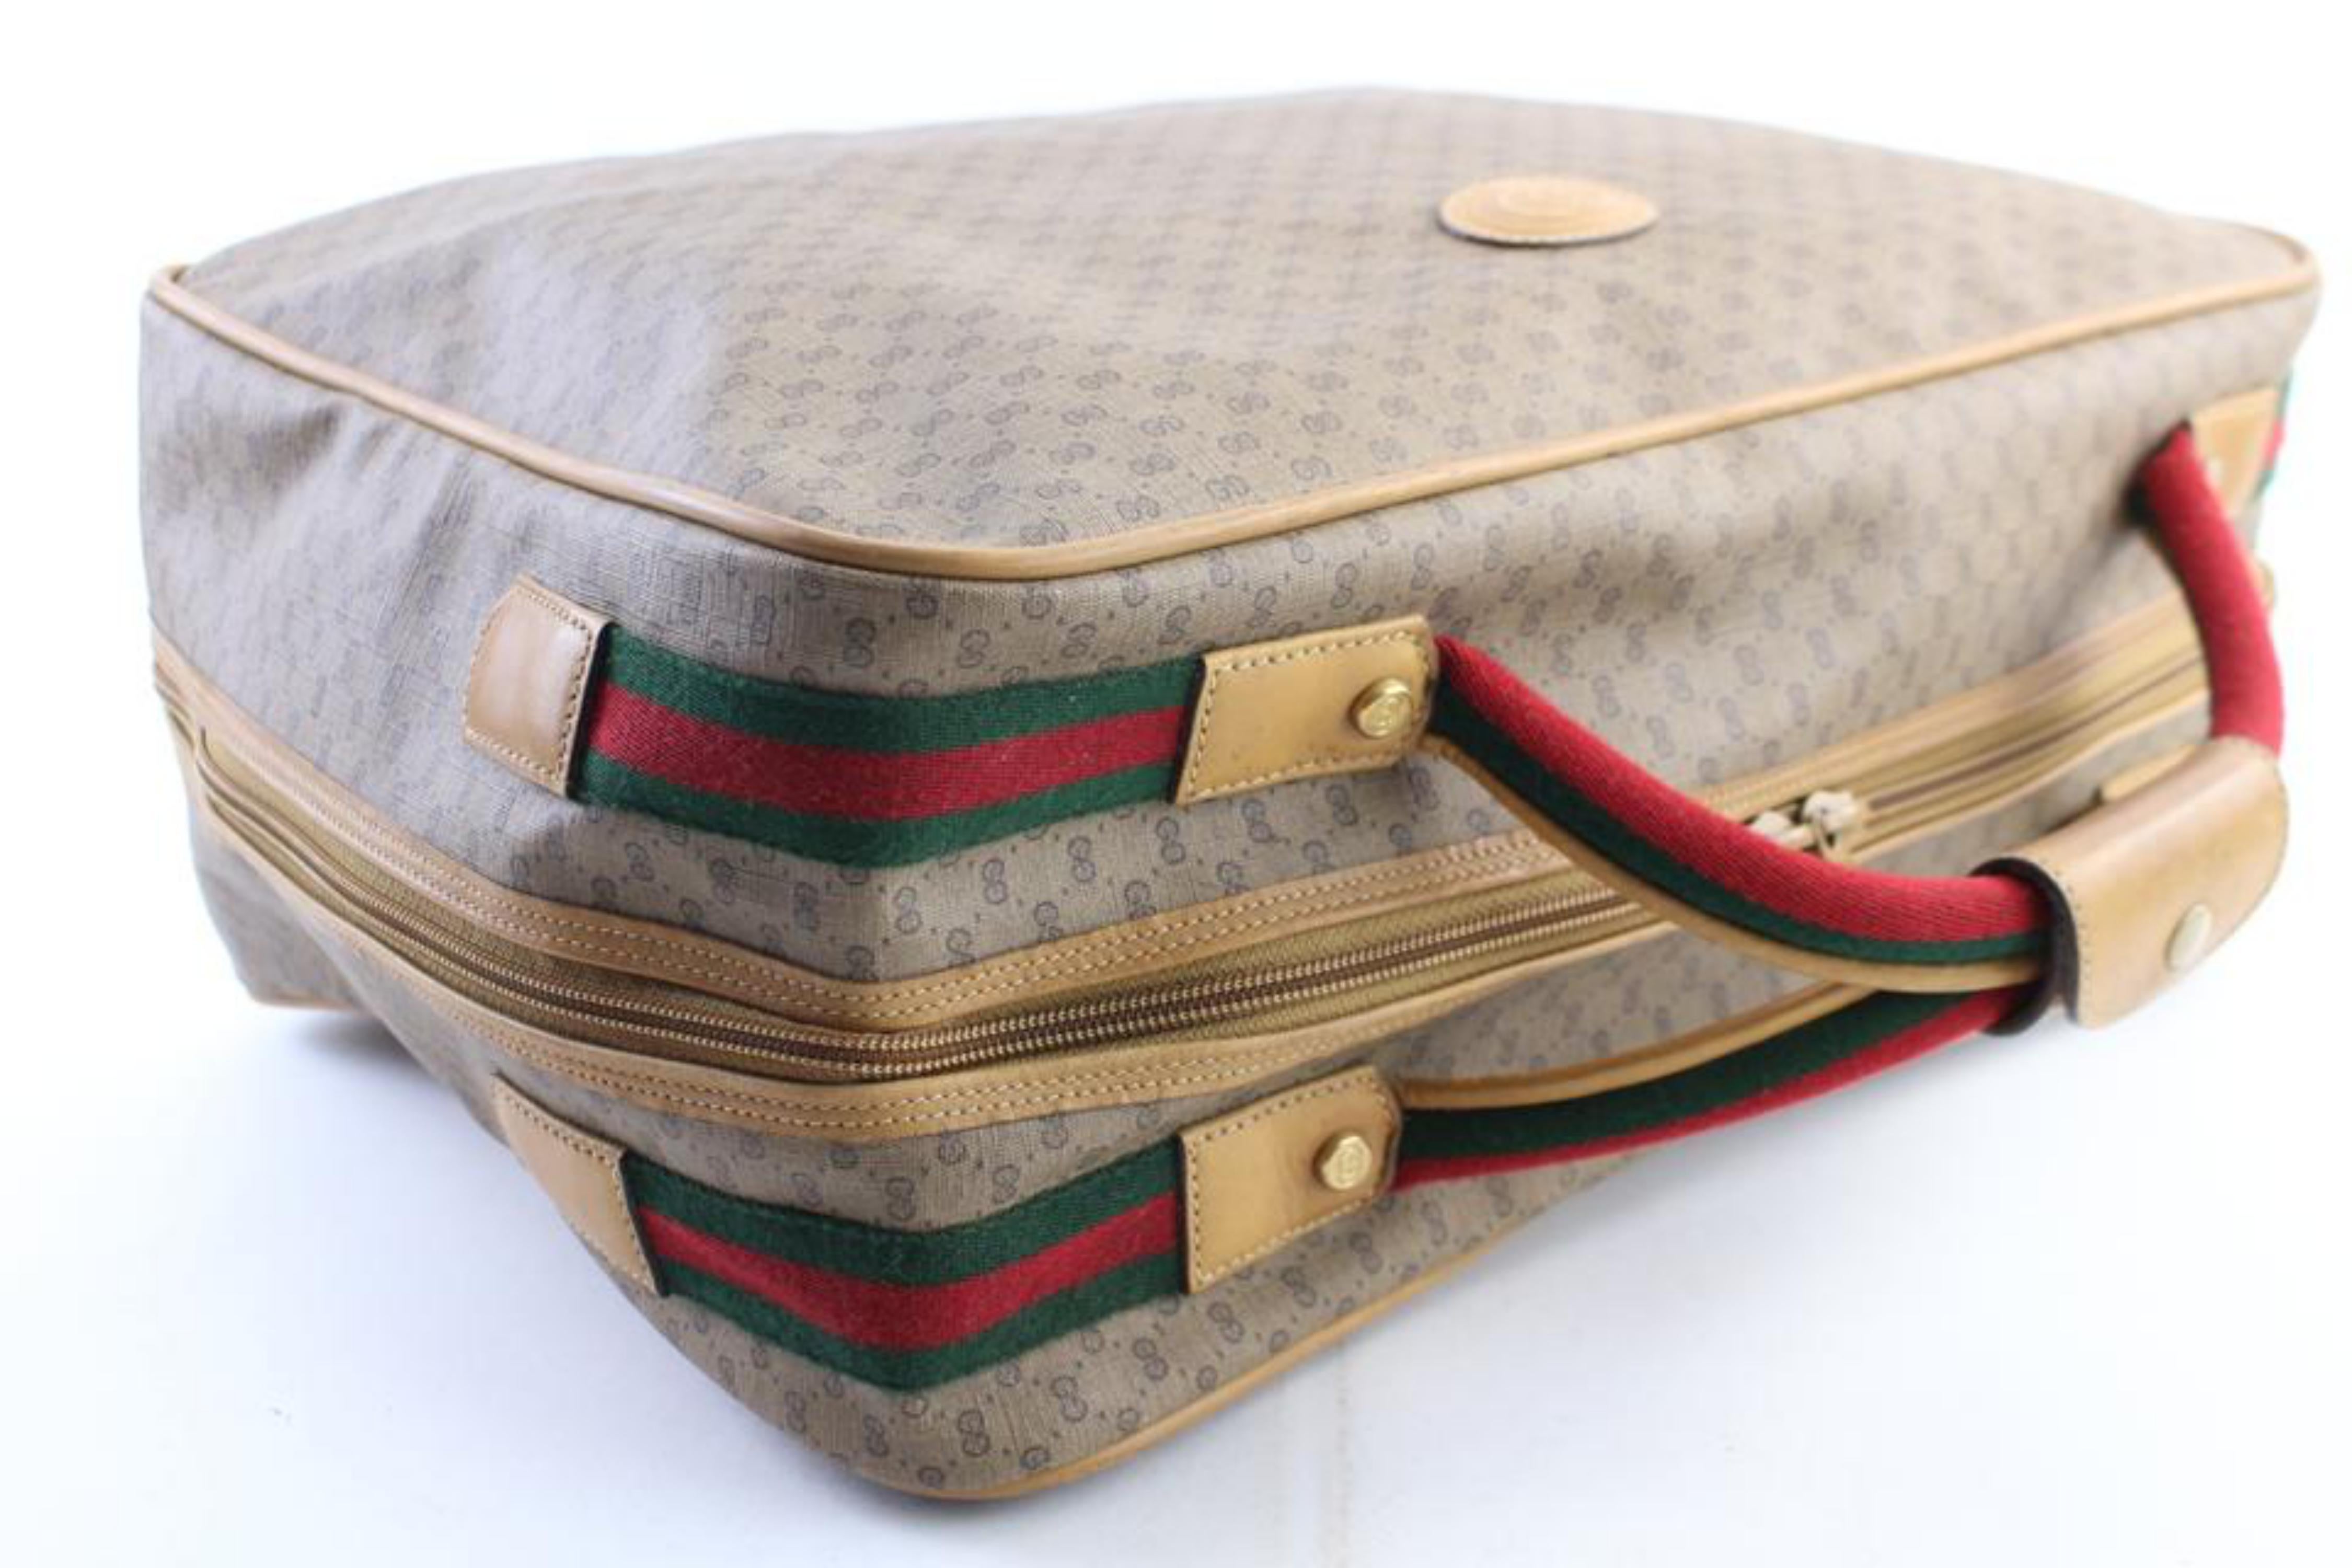 Gucci Duffle Web Monogram Suitcase 224269 Beige Leather Weekend/Travel Bag In Excellent Condition For Sale In Forest Hills, NY